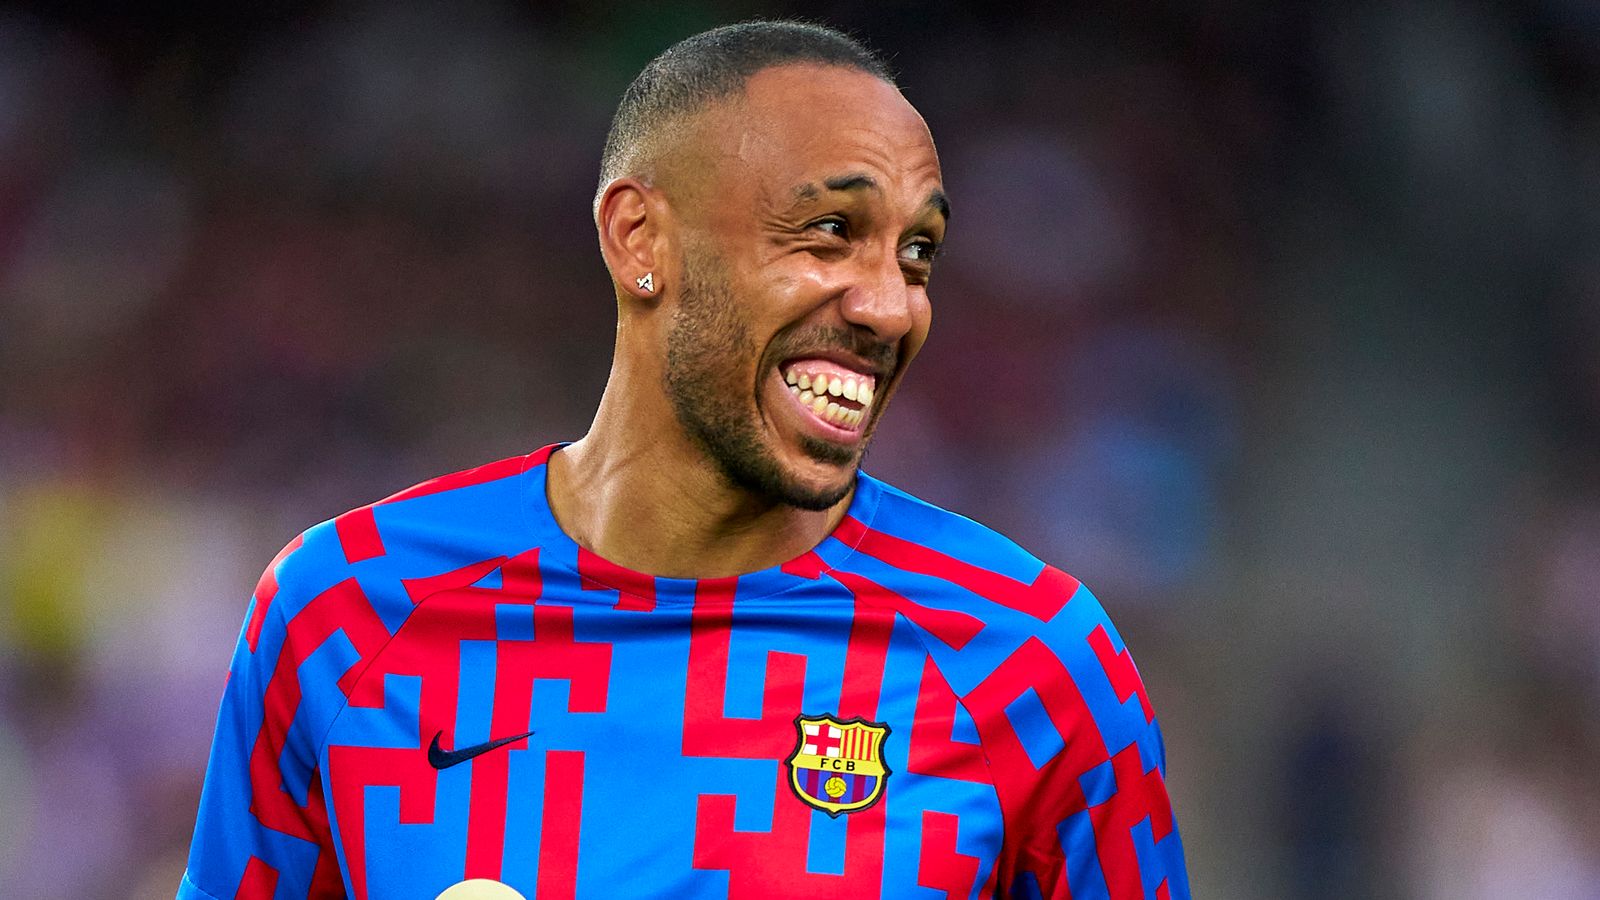 Chelsea transfer news: Pierre-Emerick Aubameyang talks advanced in deal with Barcelona which includes Marcos Alonso